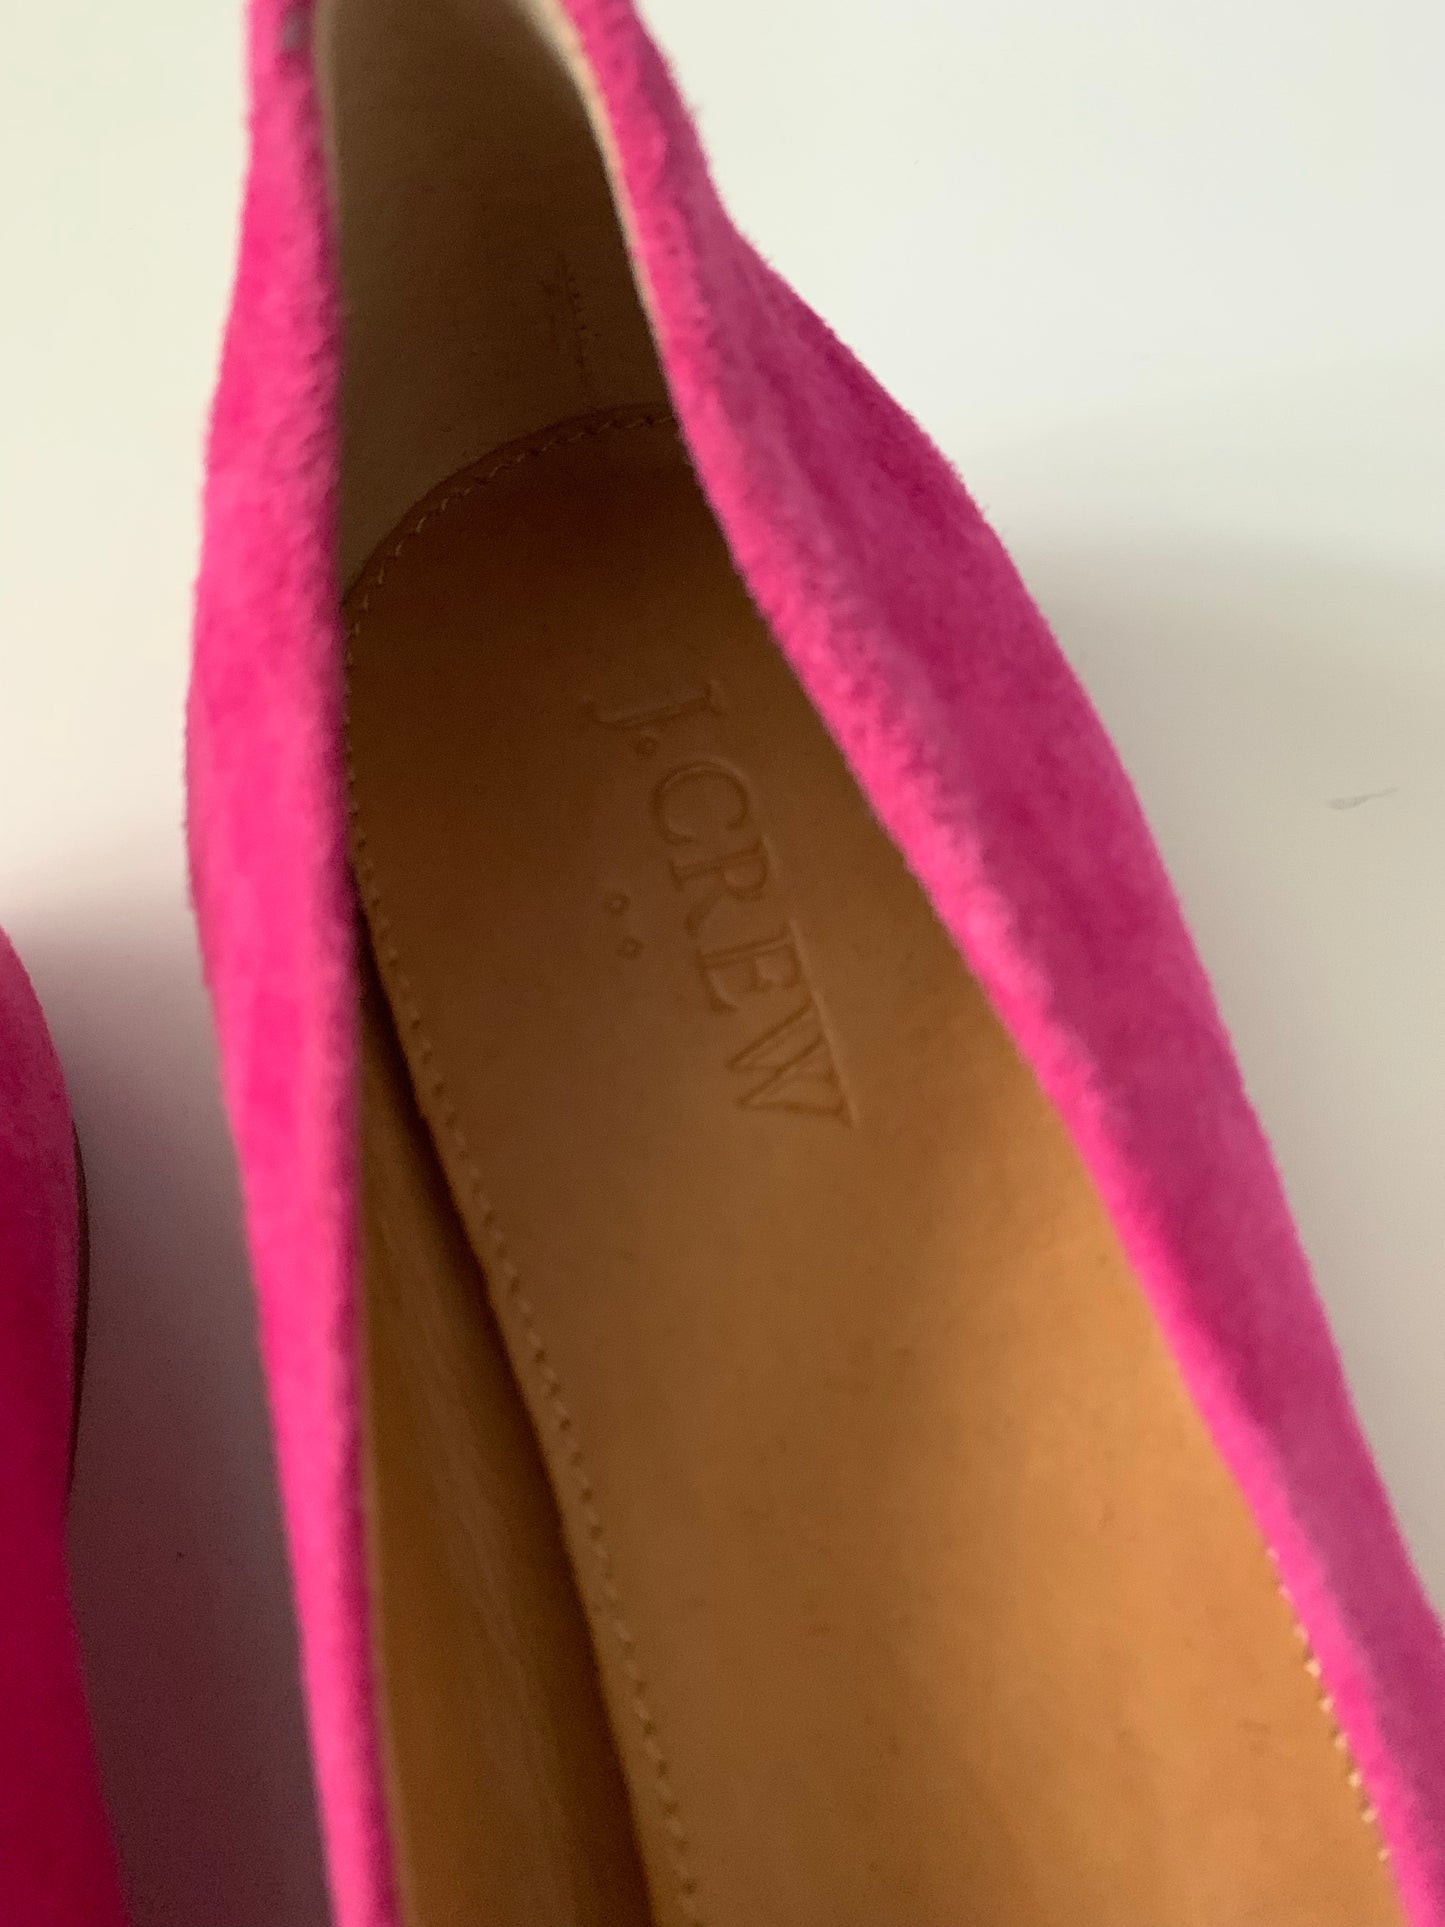 J. Crew Factory Hot Pink Suede Leather Round Toe Ballet Flat Shoes, Size 8.5